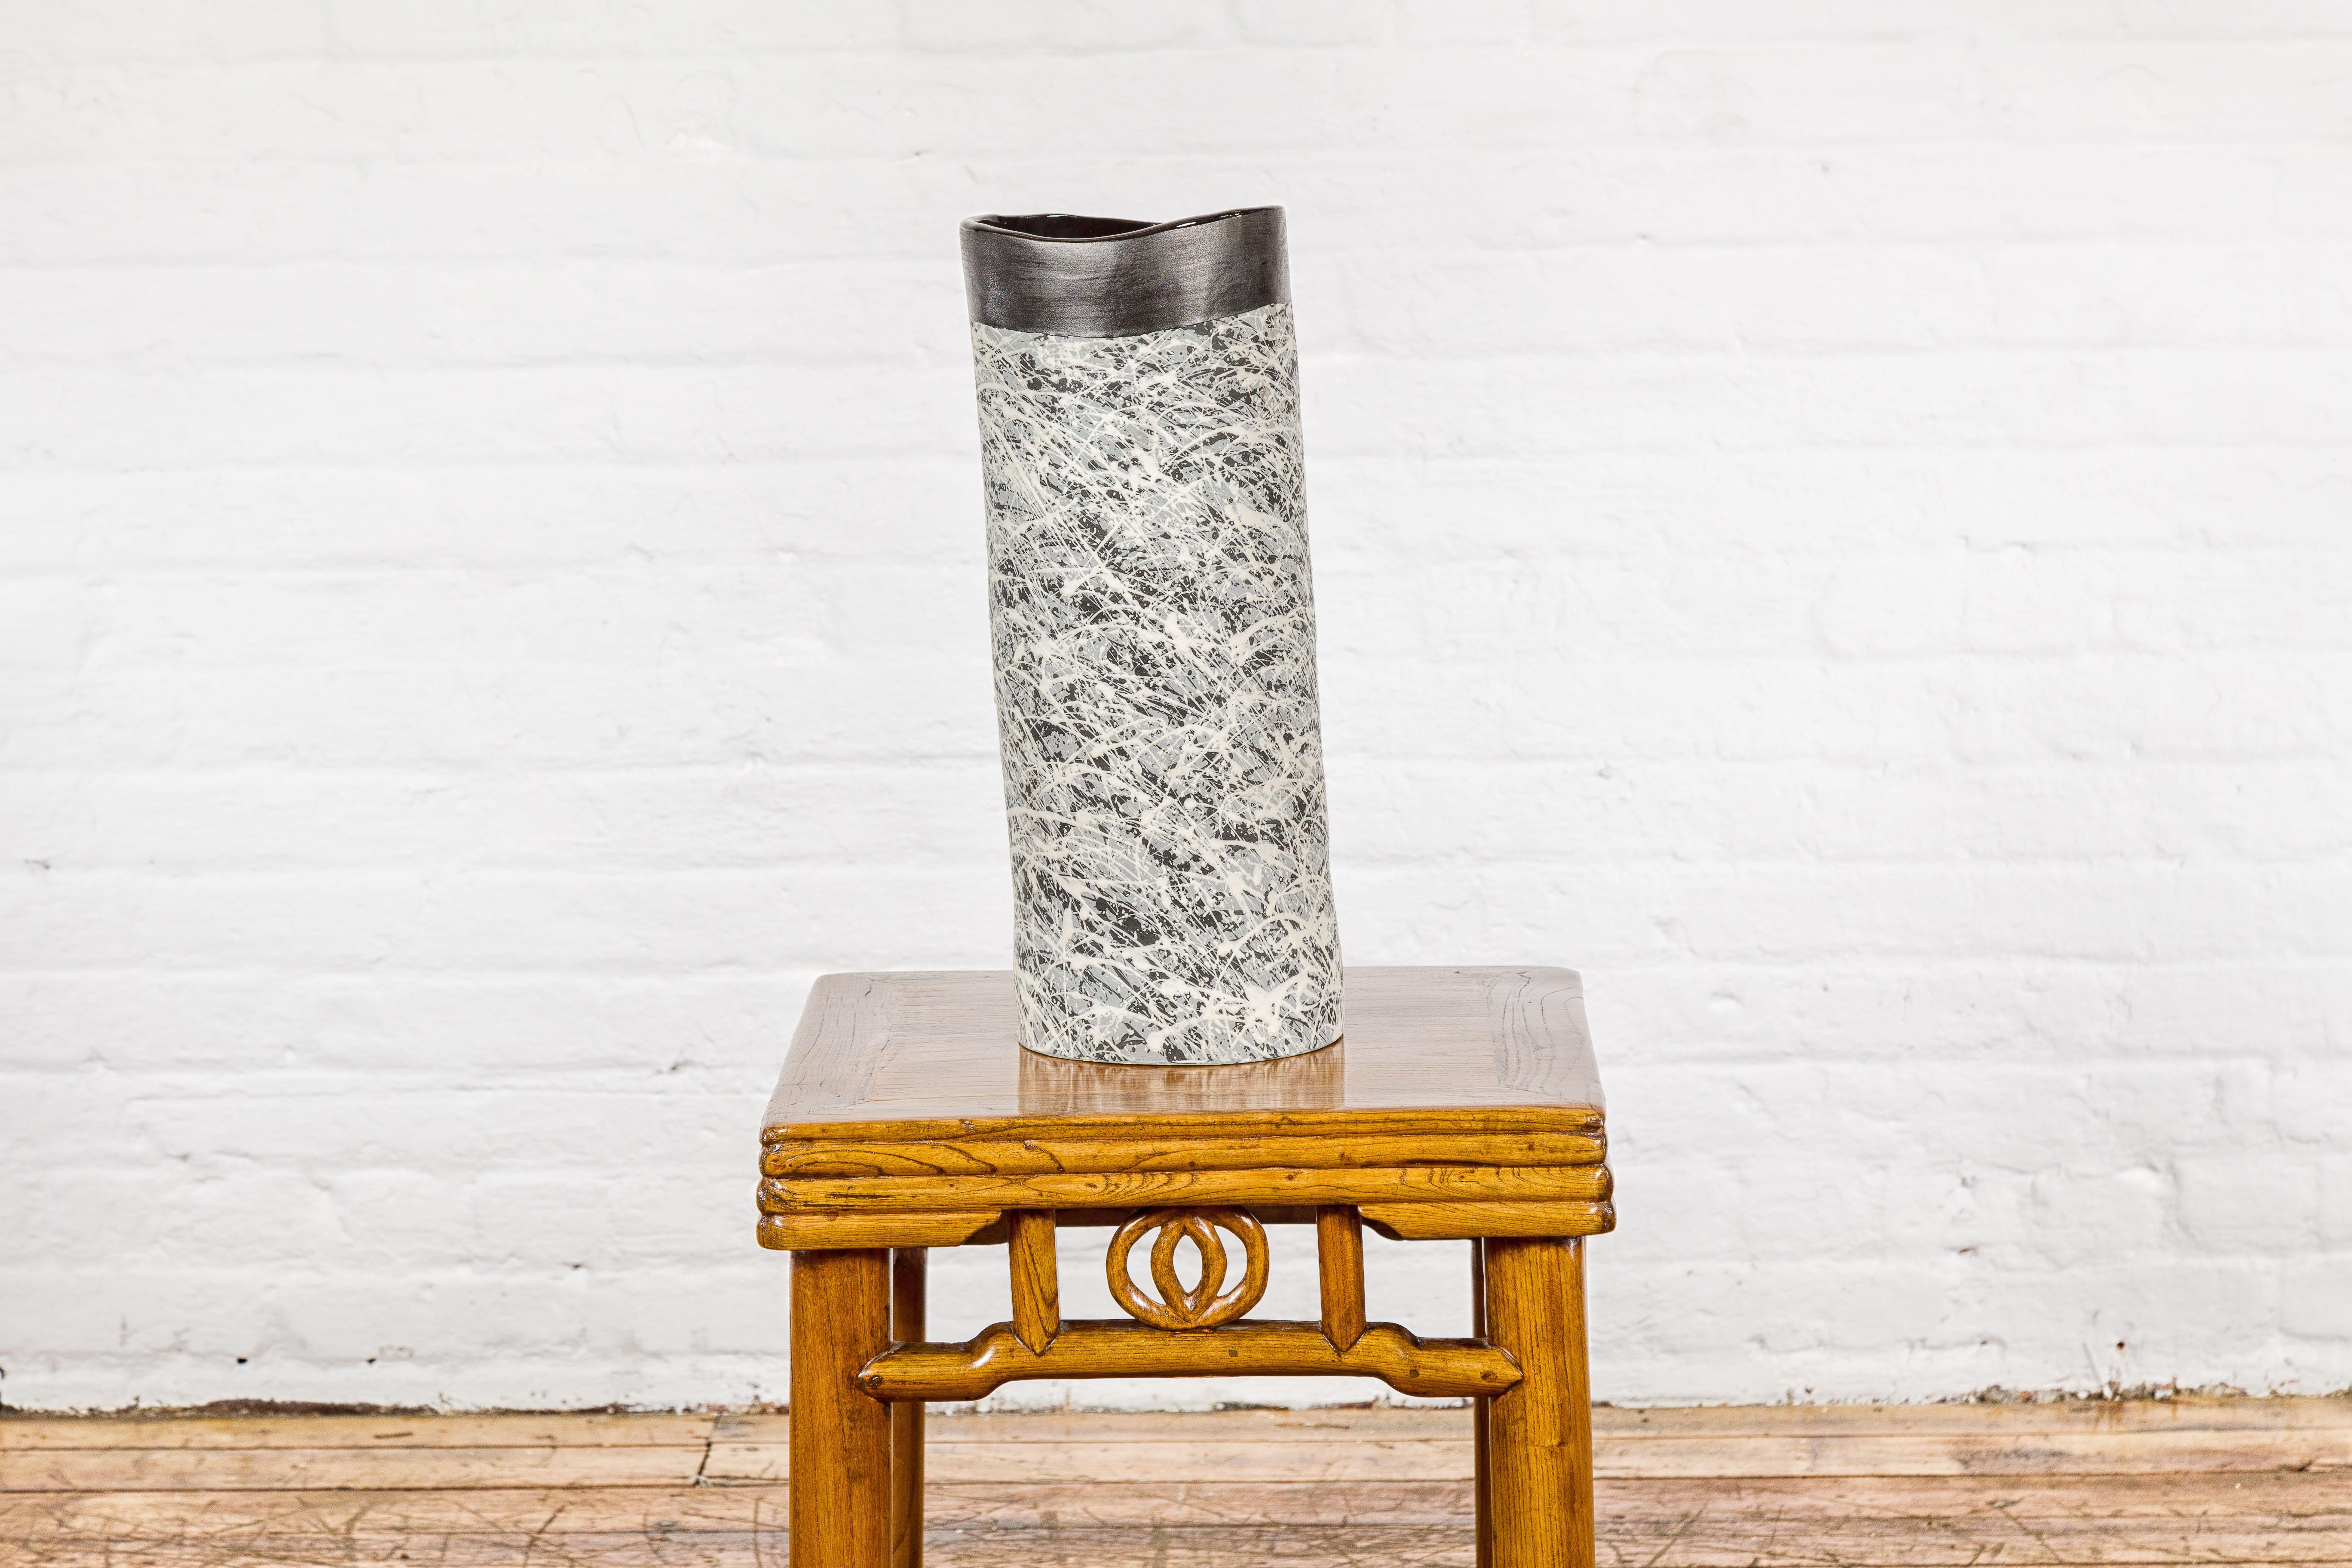 A textured black, gray and white spattered ceramic vase. This ceramic vase captivates with its oblong silhouette and an arresting spatter of black, gray, and white, creating a dynamic abstract pattern. The textured surface adds depth and intrigue,